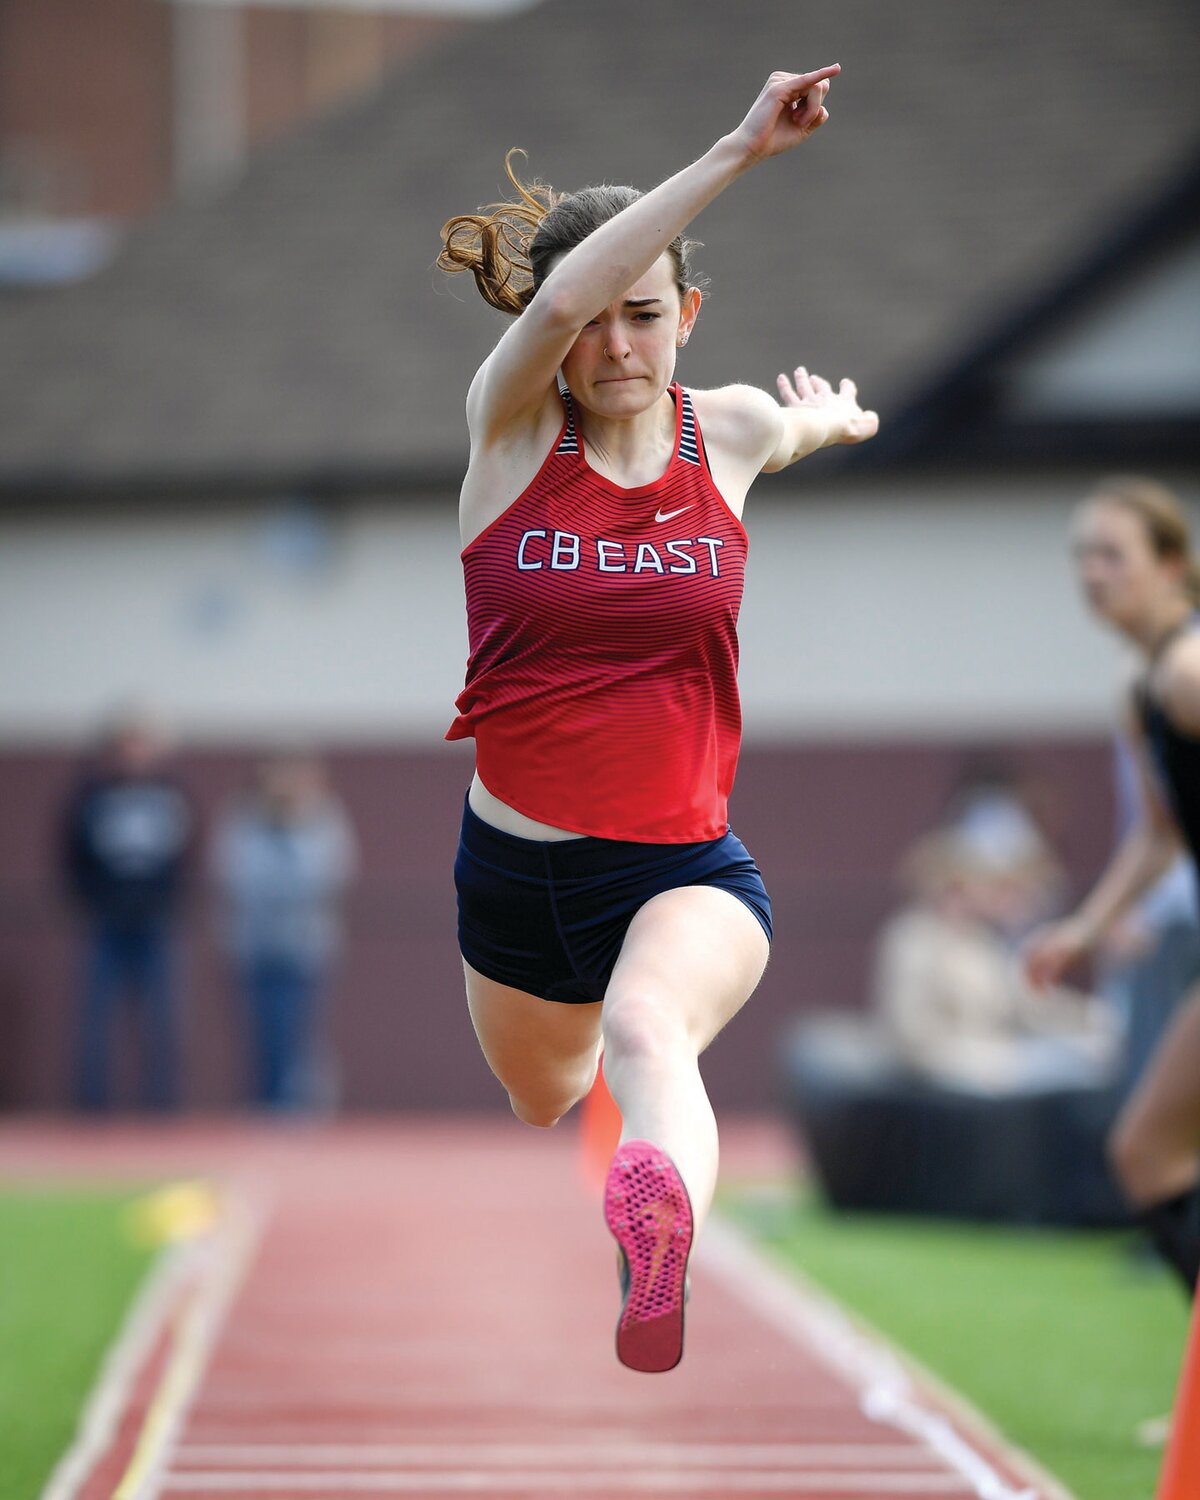 CB East’s Ava DePrizio finished third in the girls triple jump with a distance of 33 feet, 4.5 inches